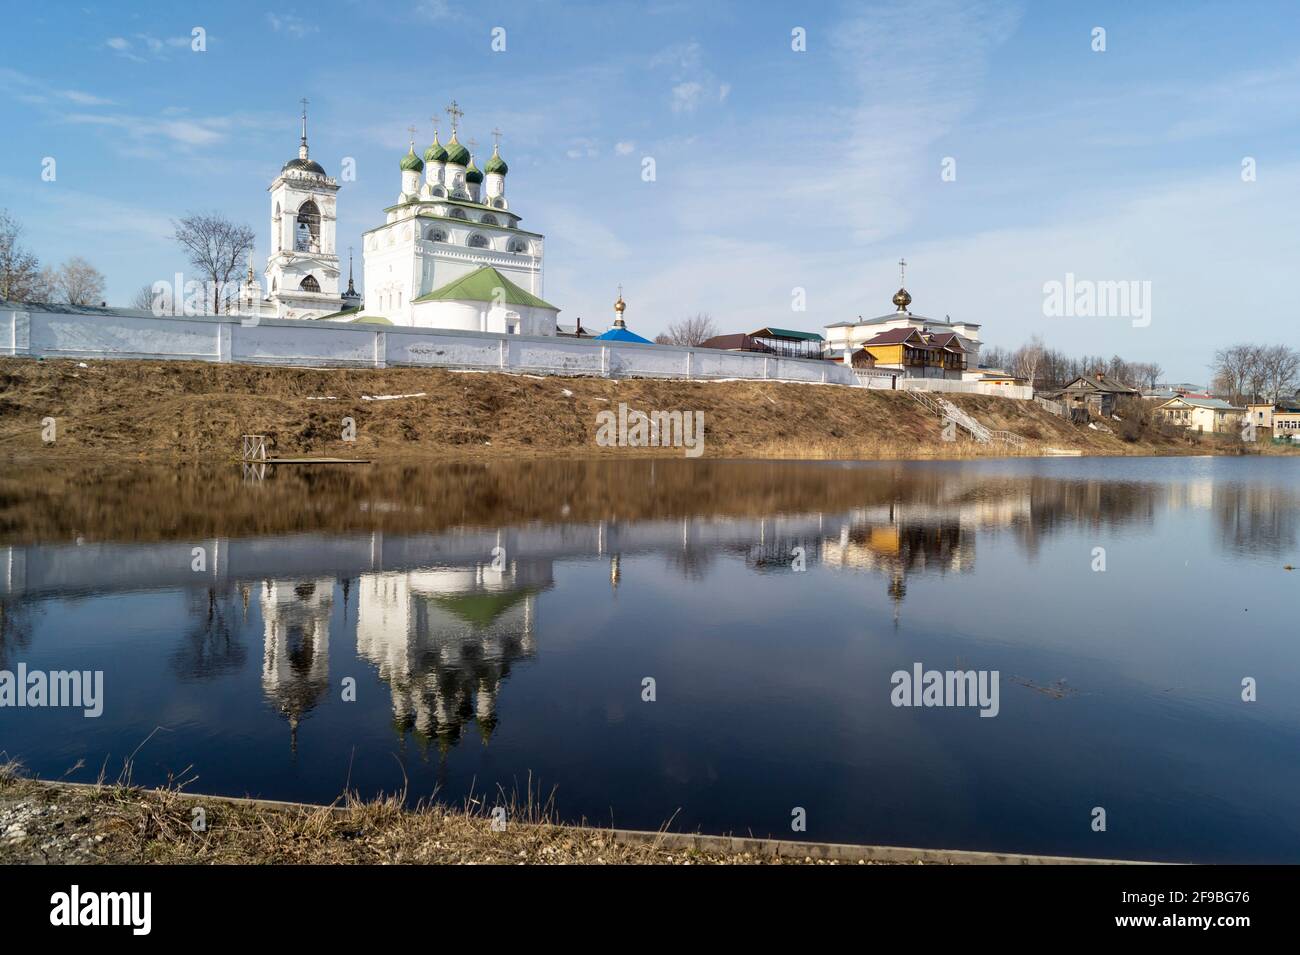 Christian church on the river bank against the background of a blue sky with a white cloud. Beautiful landscape in spring time Stock Photo